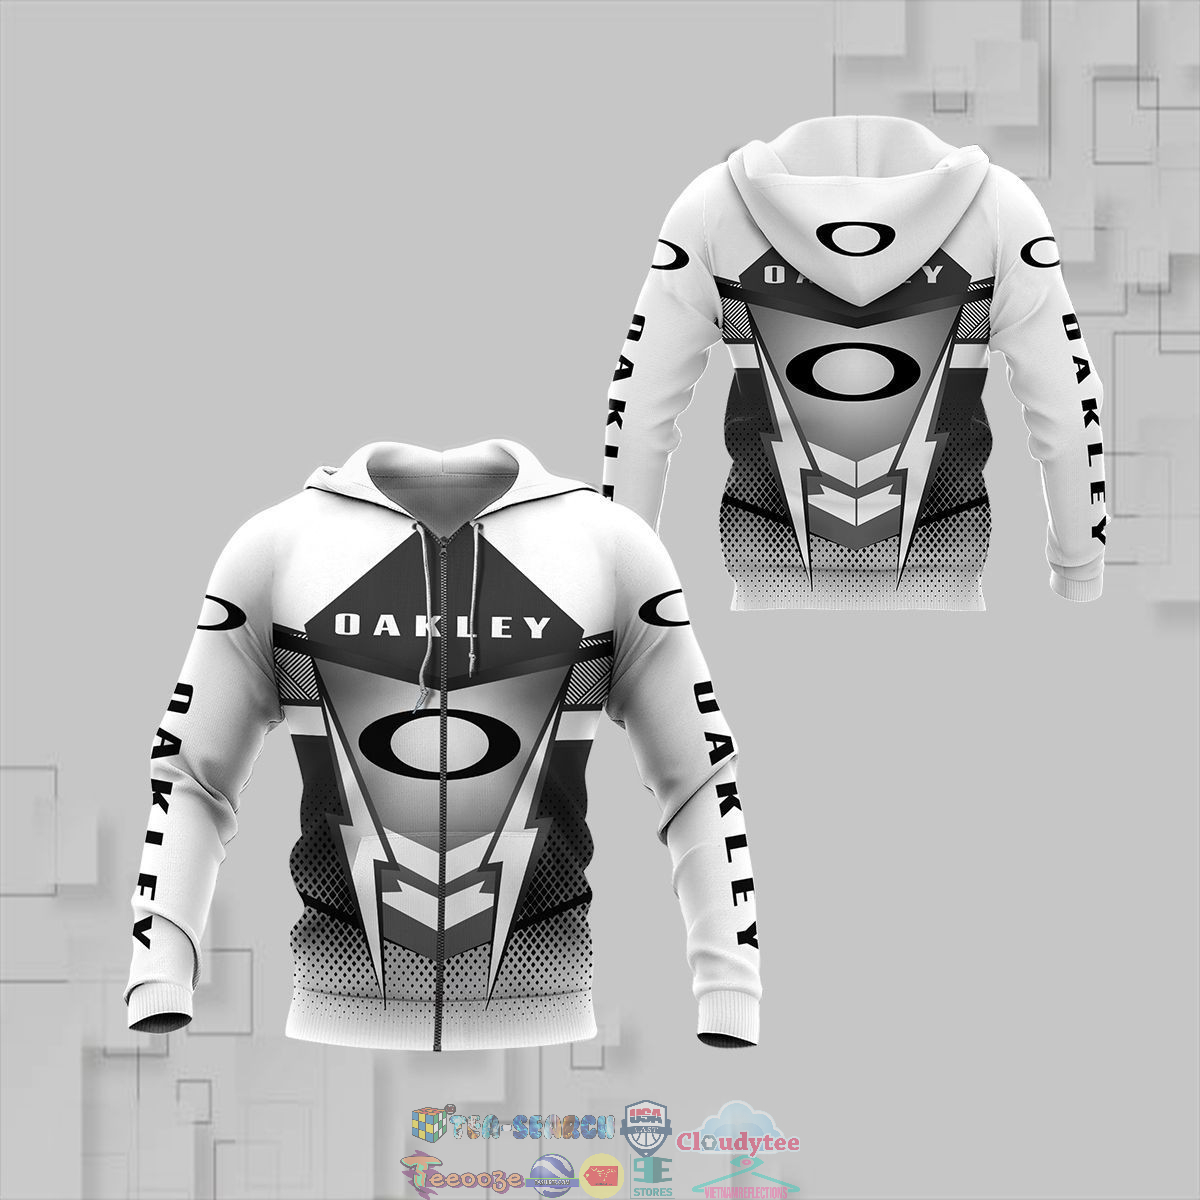 Oakley White 3D hoodie and t-shirt